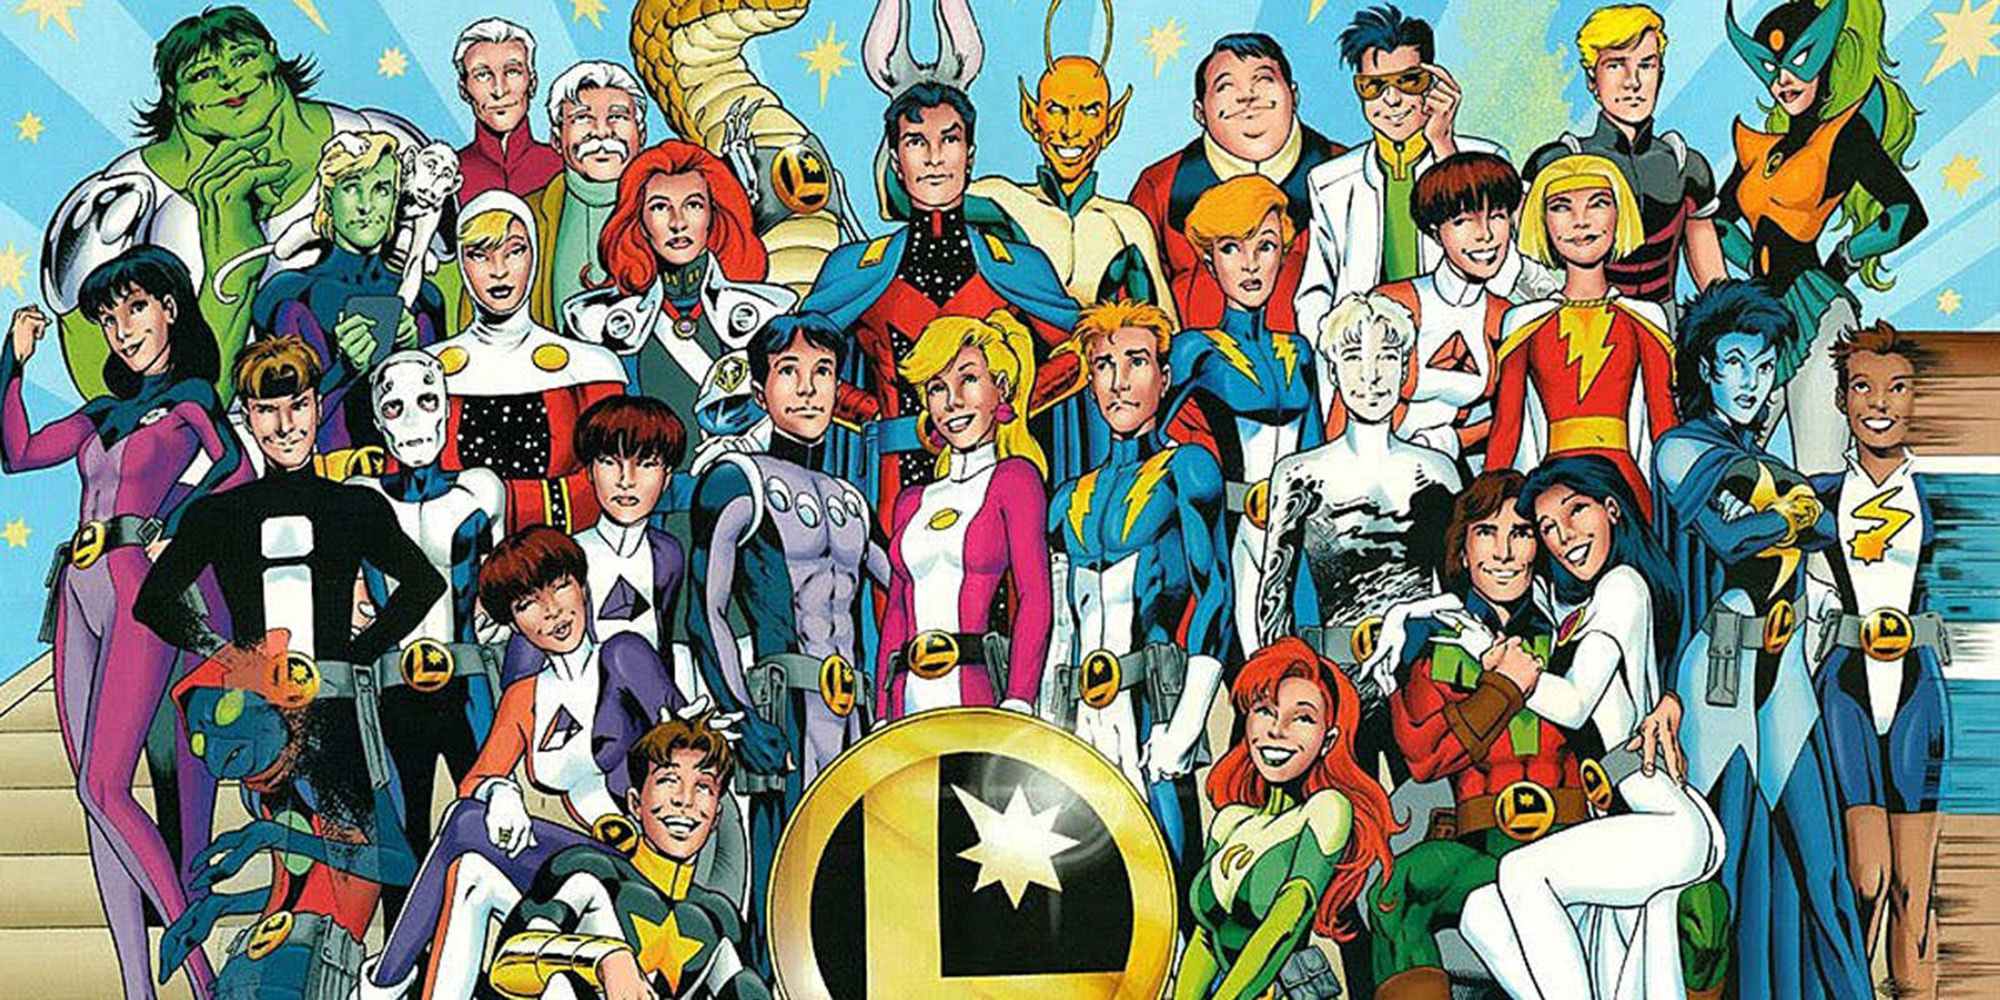 Revival of the Legion of Super-Heroes is coming in the not too distant future